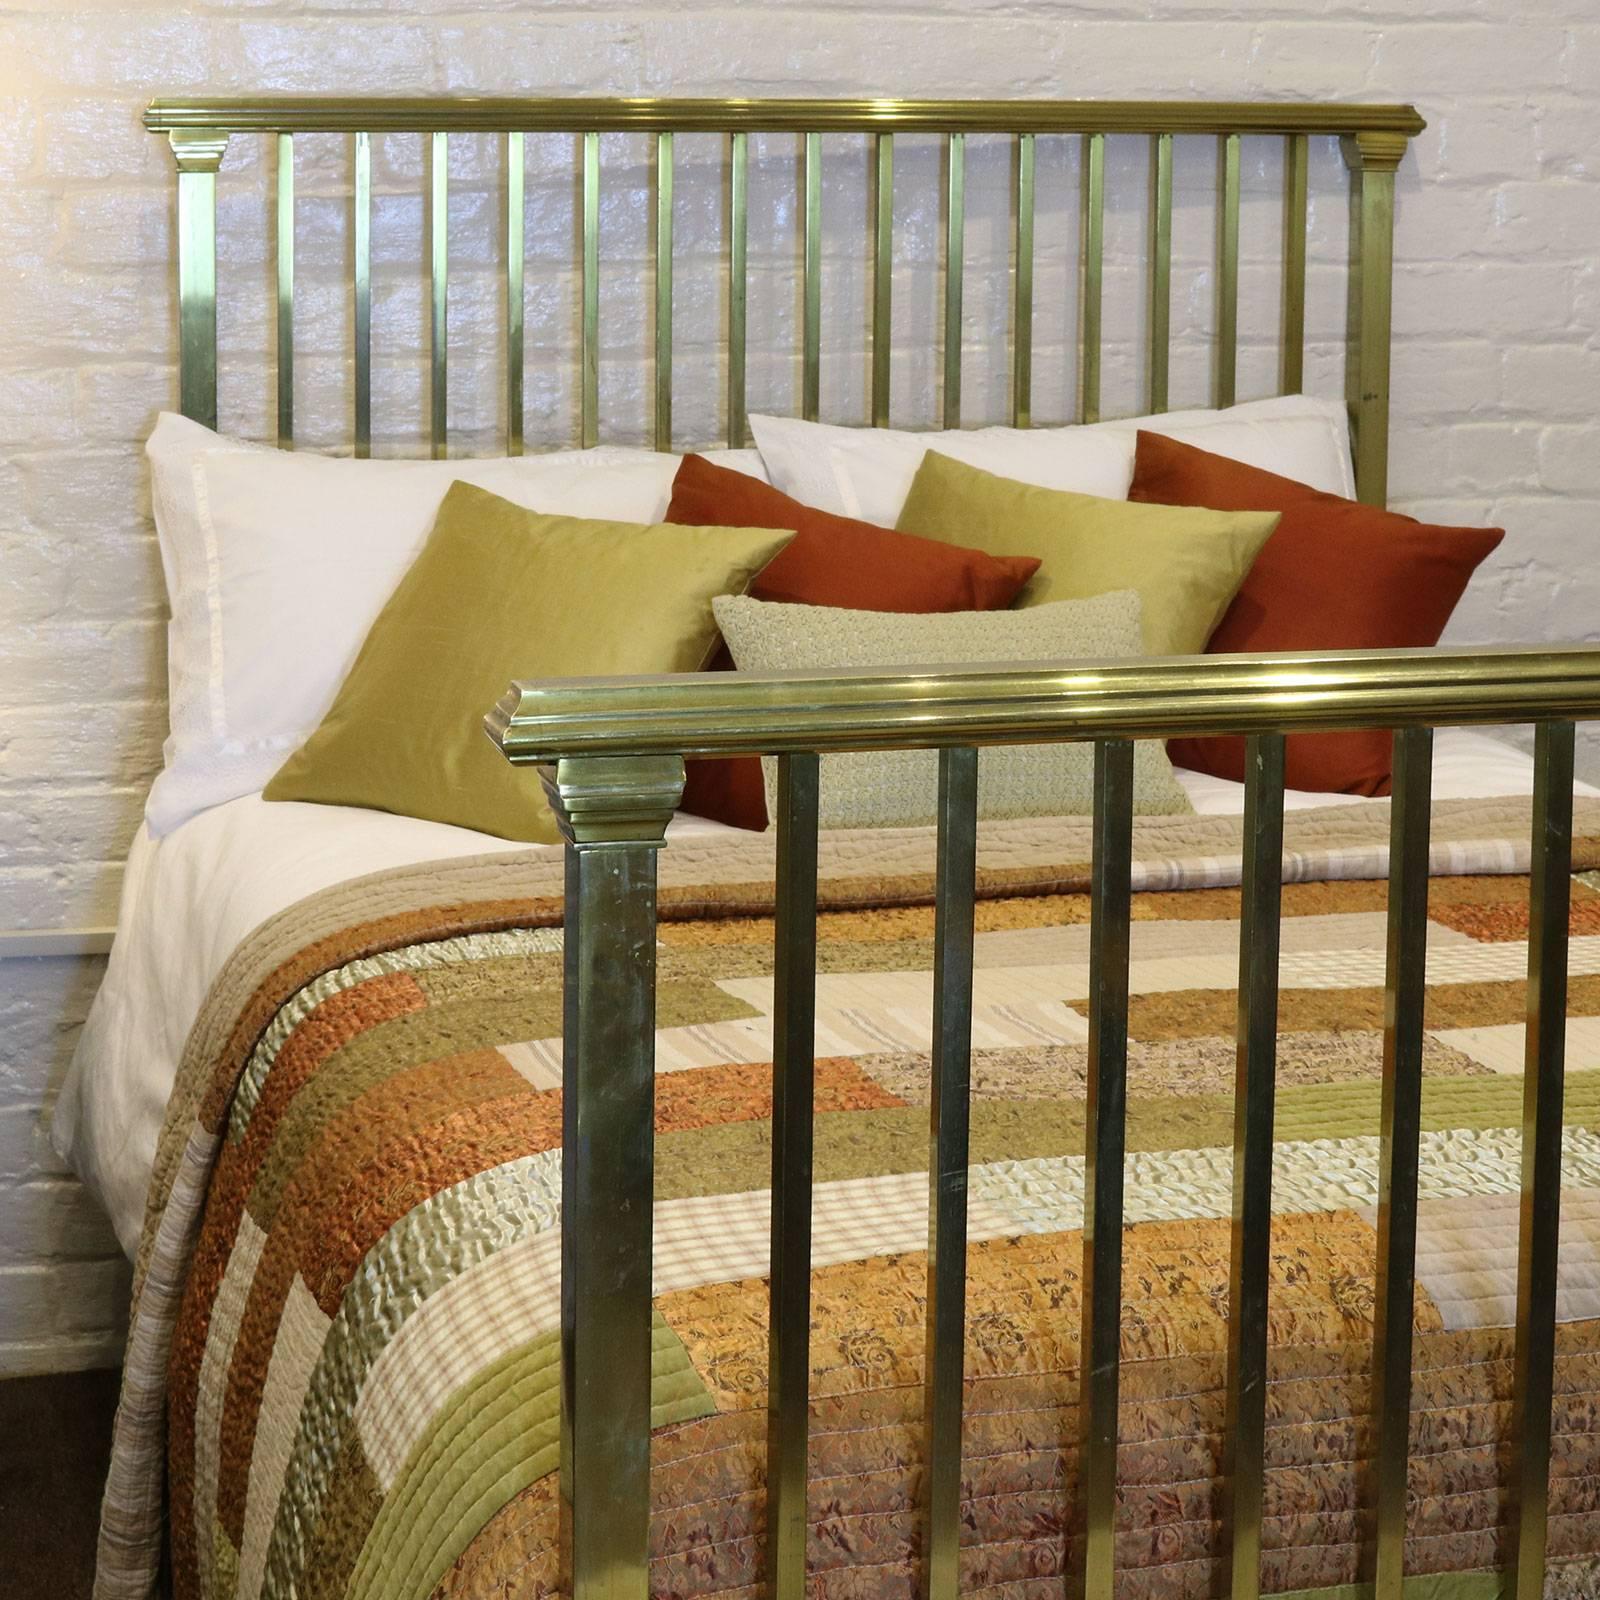 Fine Art Deco style all brass bedstead with square-sectioned brass rails and original lacquered patina.

This bed accepts a standard double 4ft 6in (54 inches) base and mattress set.

The price is for the bed frame alone, the base, mattress,